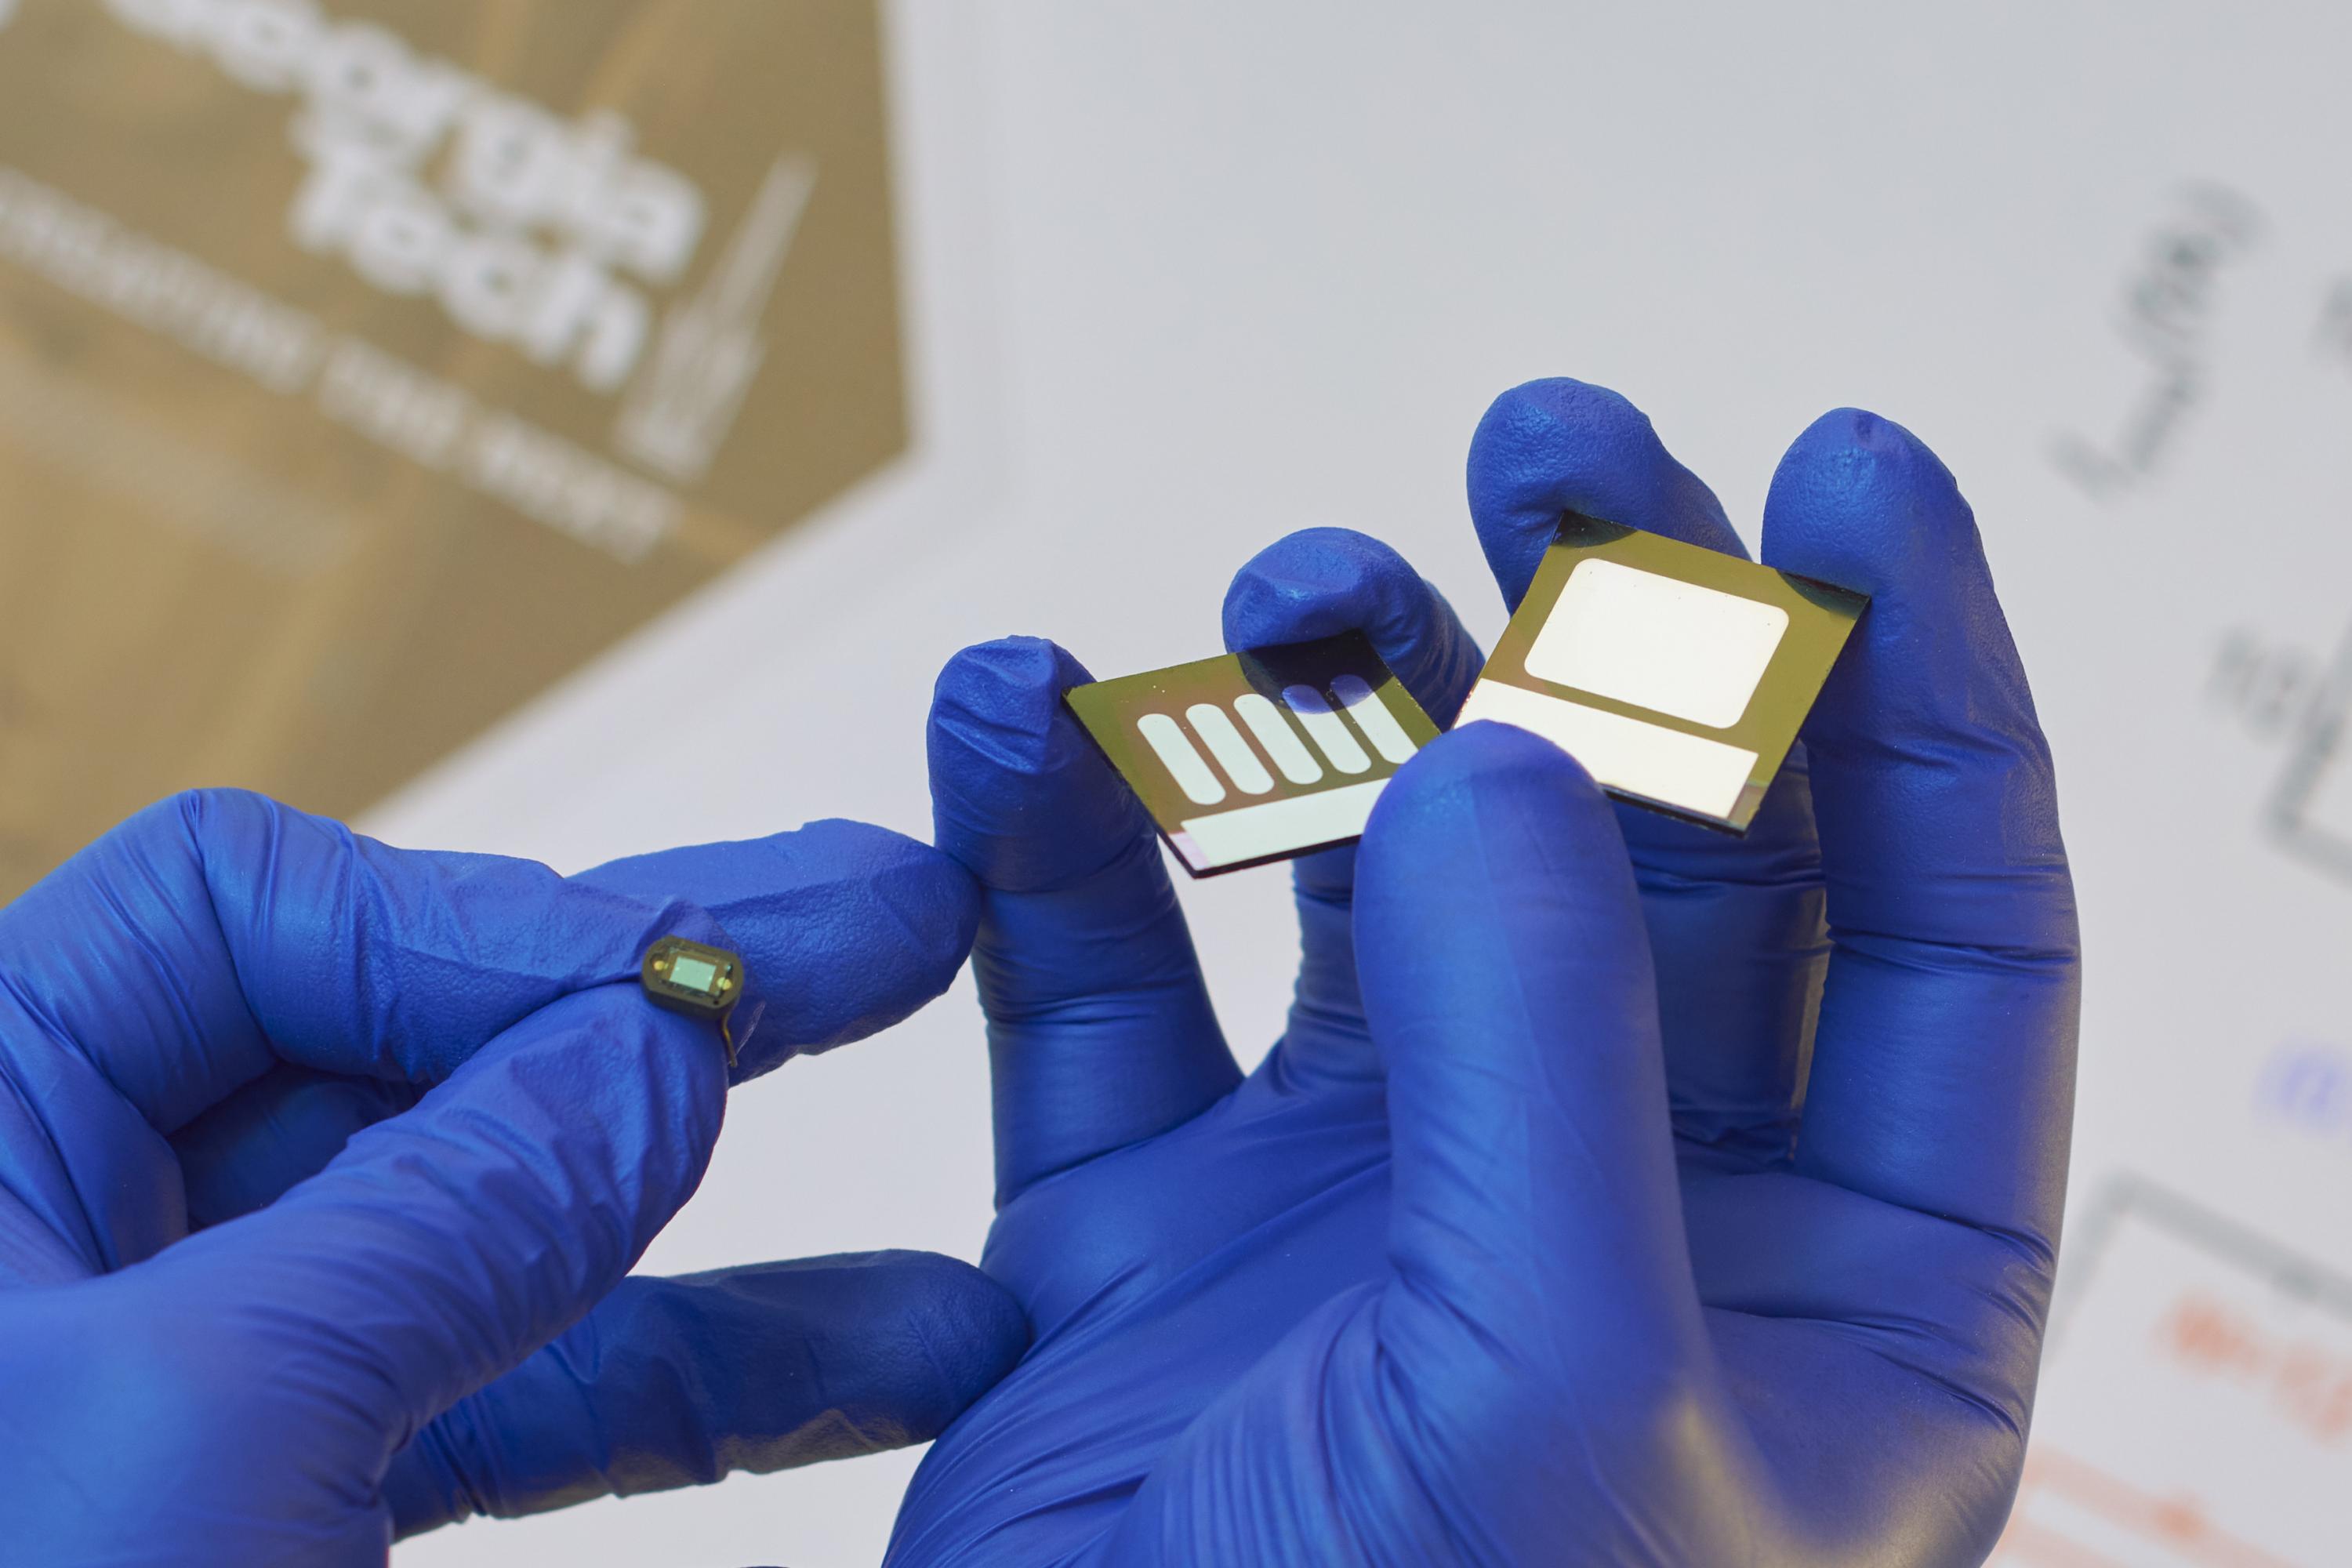 Organic photodiodes can be much larger than their silicon counterparts. On the left is a silicon photodiode compared to two large-area organic photodiodes. (Credit: Canek Fuentes-Hernandez, Georgia Tech)